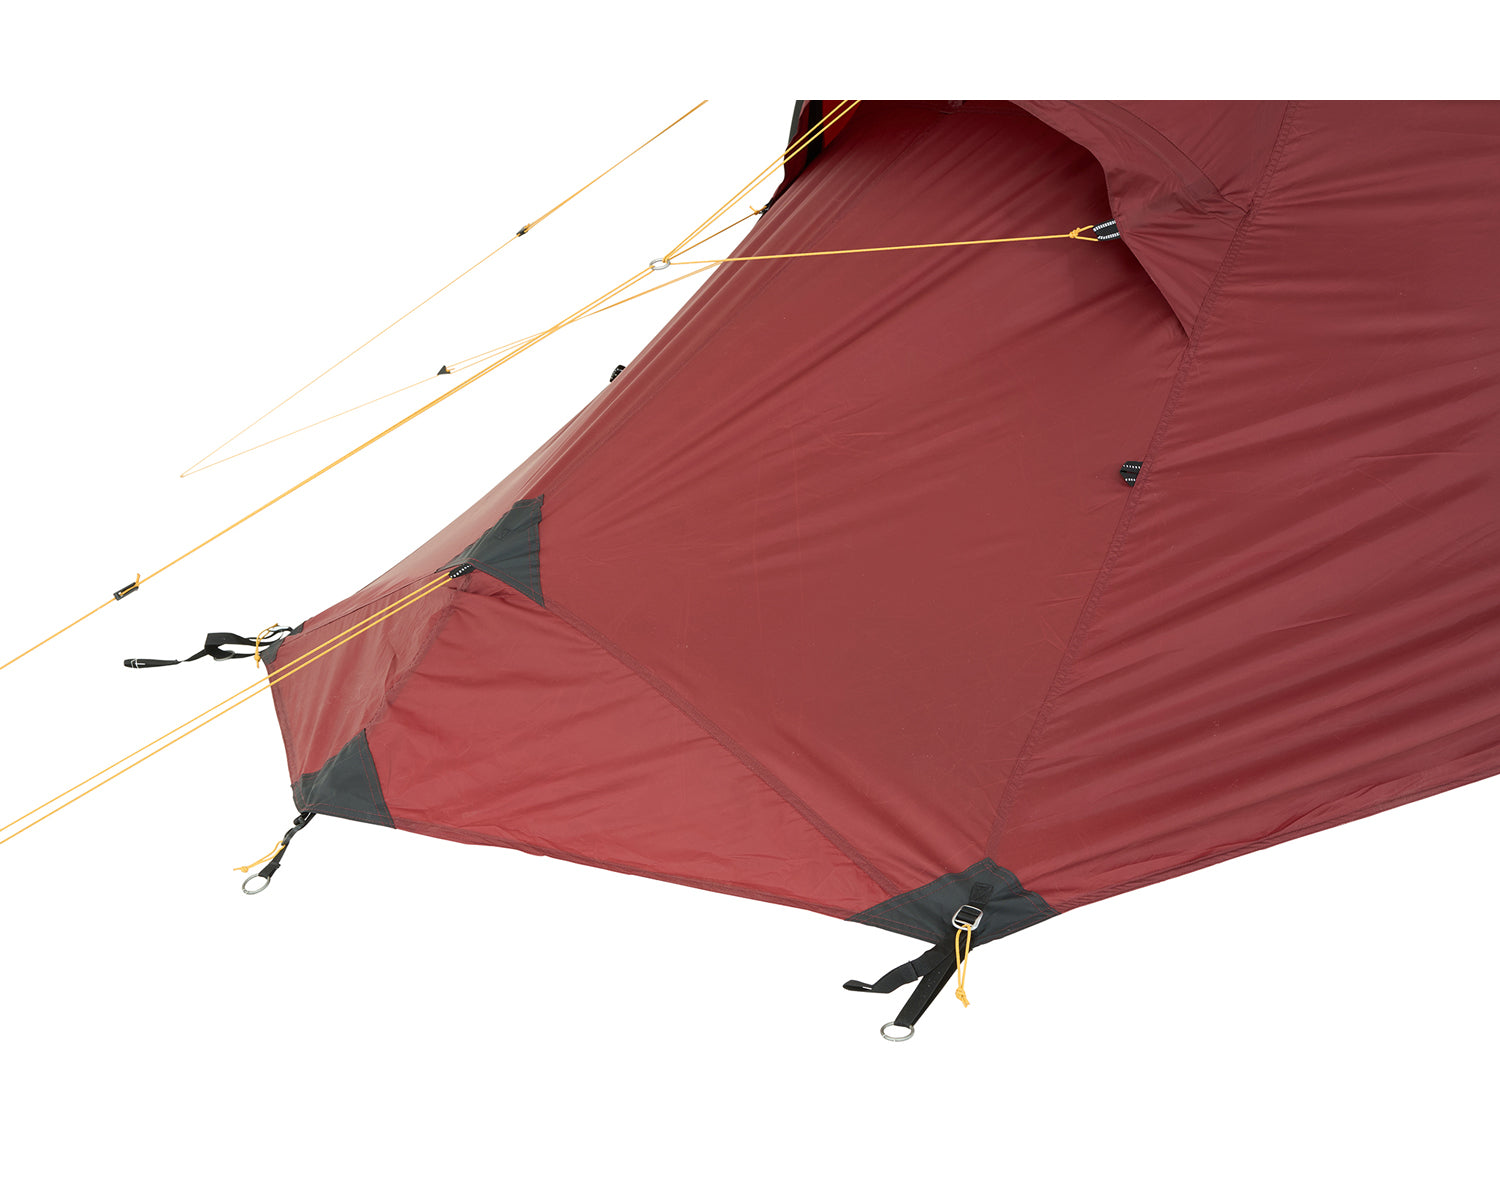 Seiland 2 SP tent - 2 person - Burnt Red